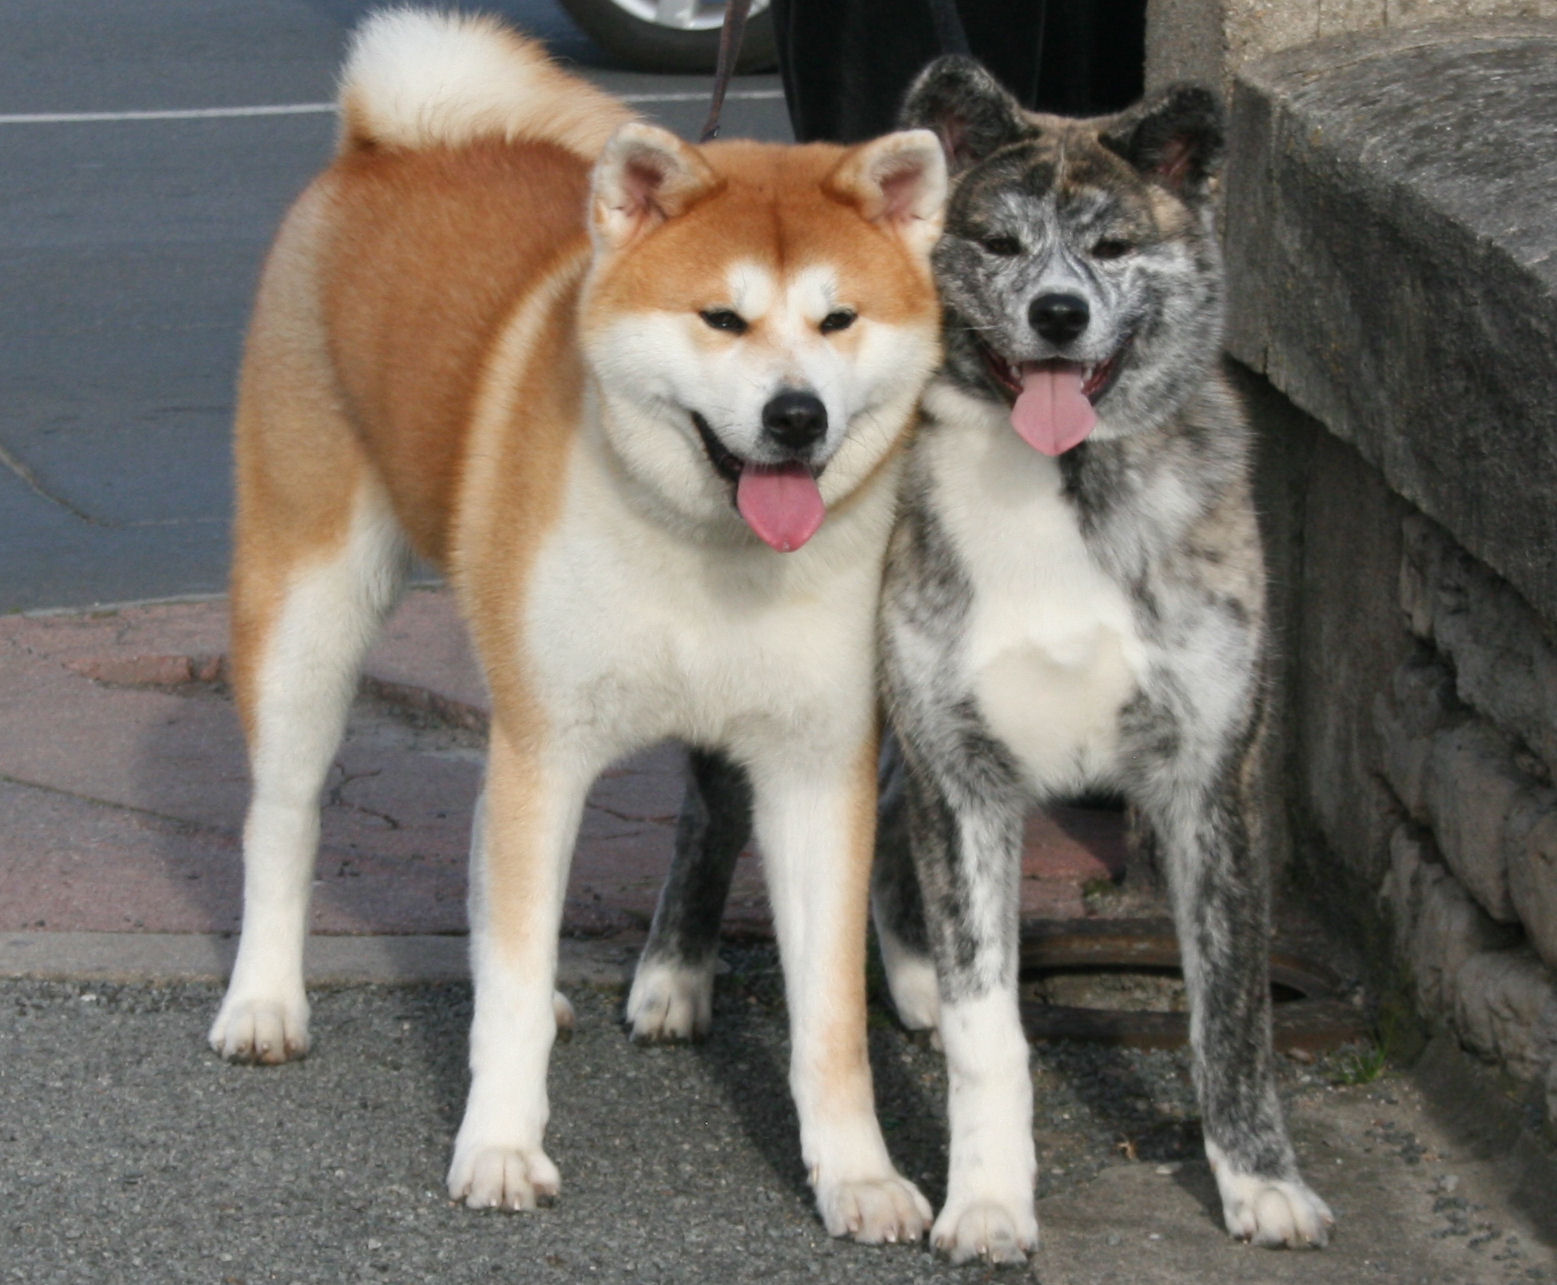 What's the difference between American Akita & Japanese Akita